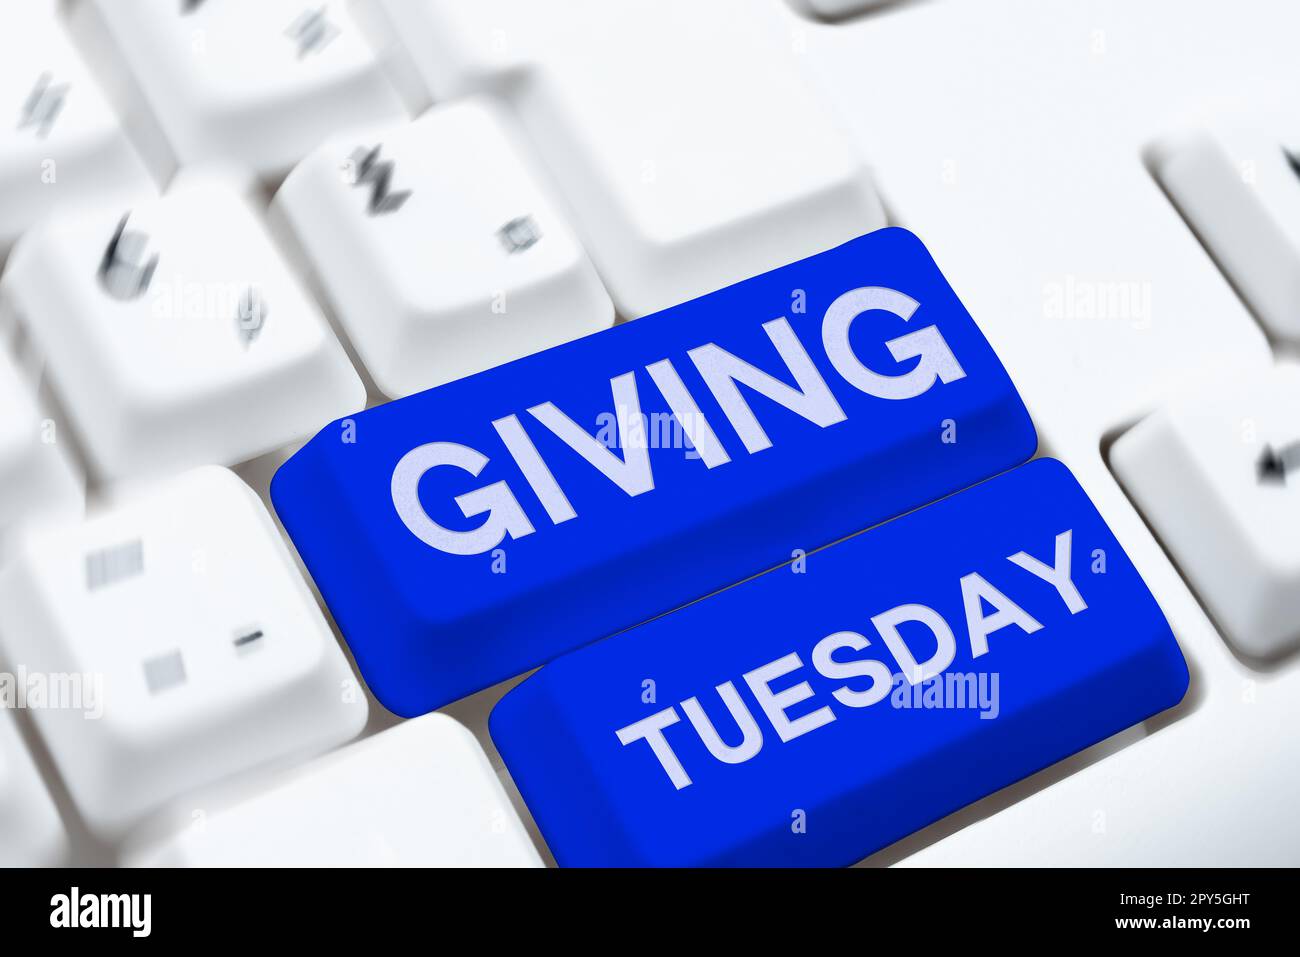 Writing displaying text Giving Tuesday. Concept meaning international day of charitable giving Hashtag activism Stock Photo